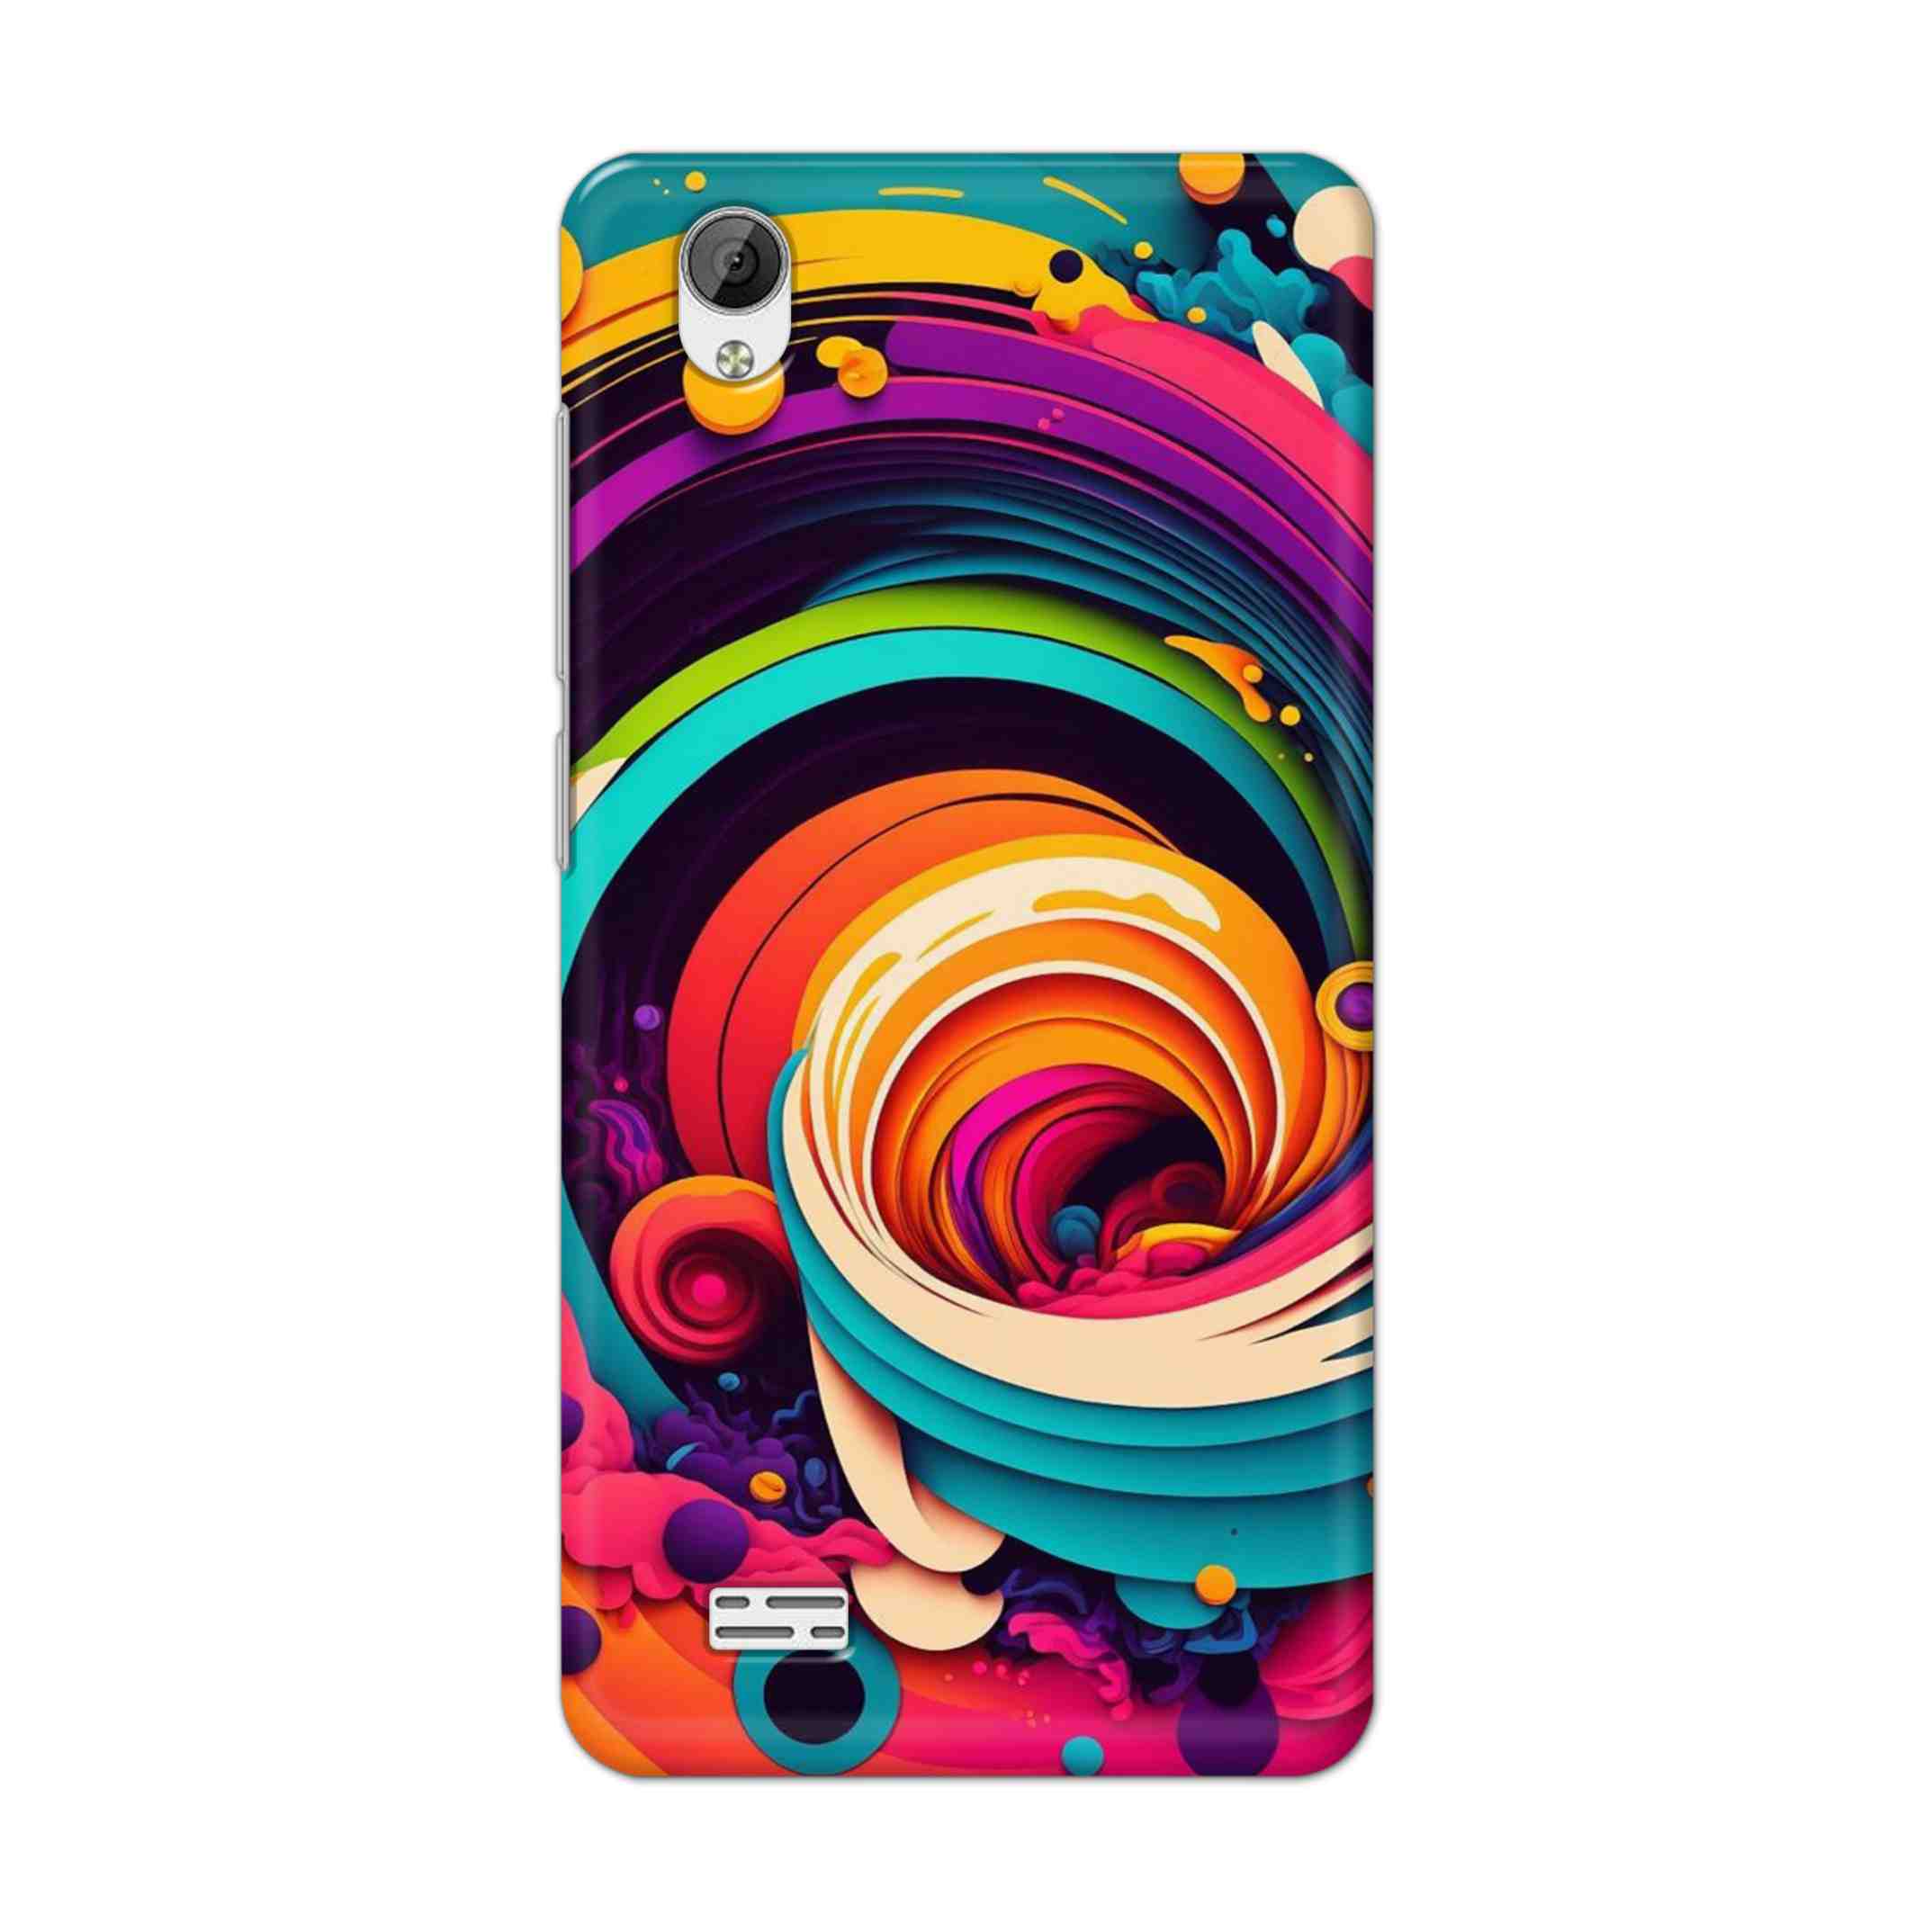 Buy Colour Circle Hard Back Mobile Phone Case Cover For Vivo Y31 Online